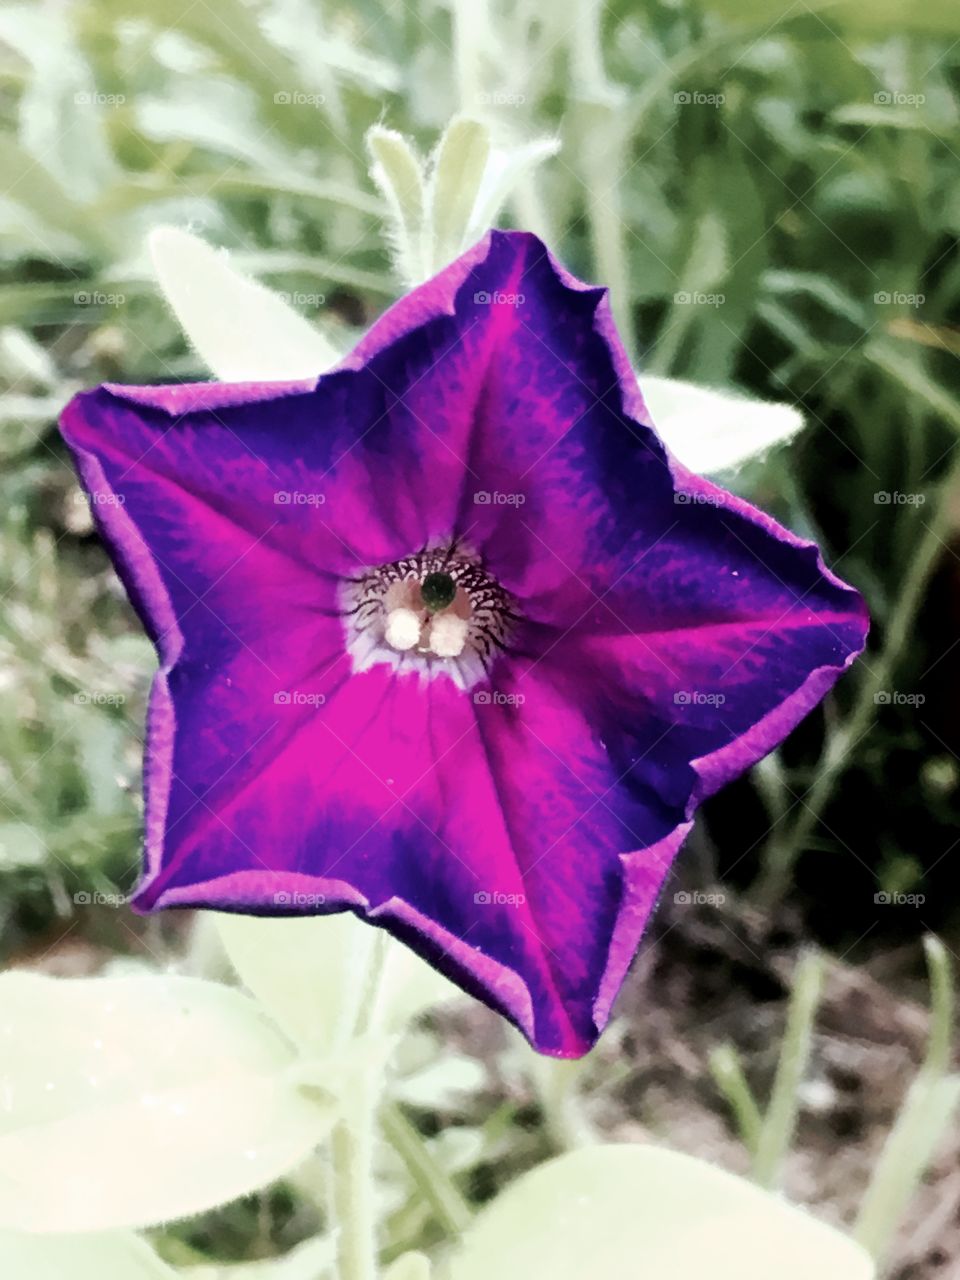 Another flower
